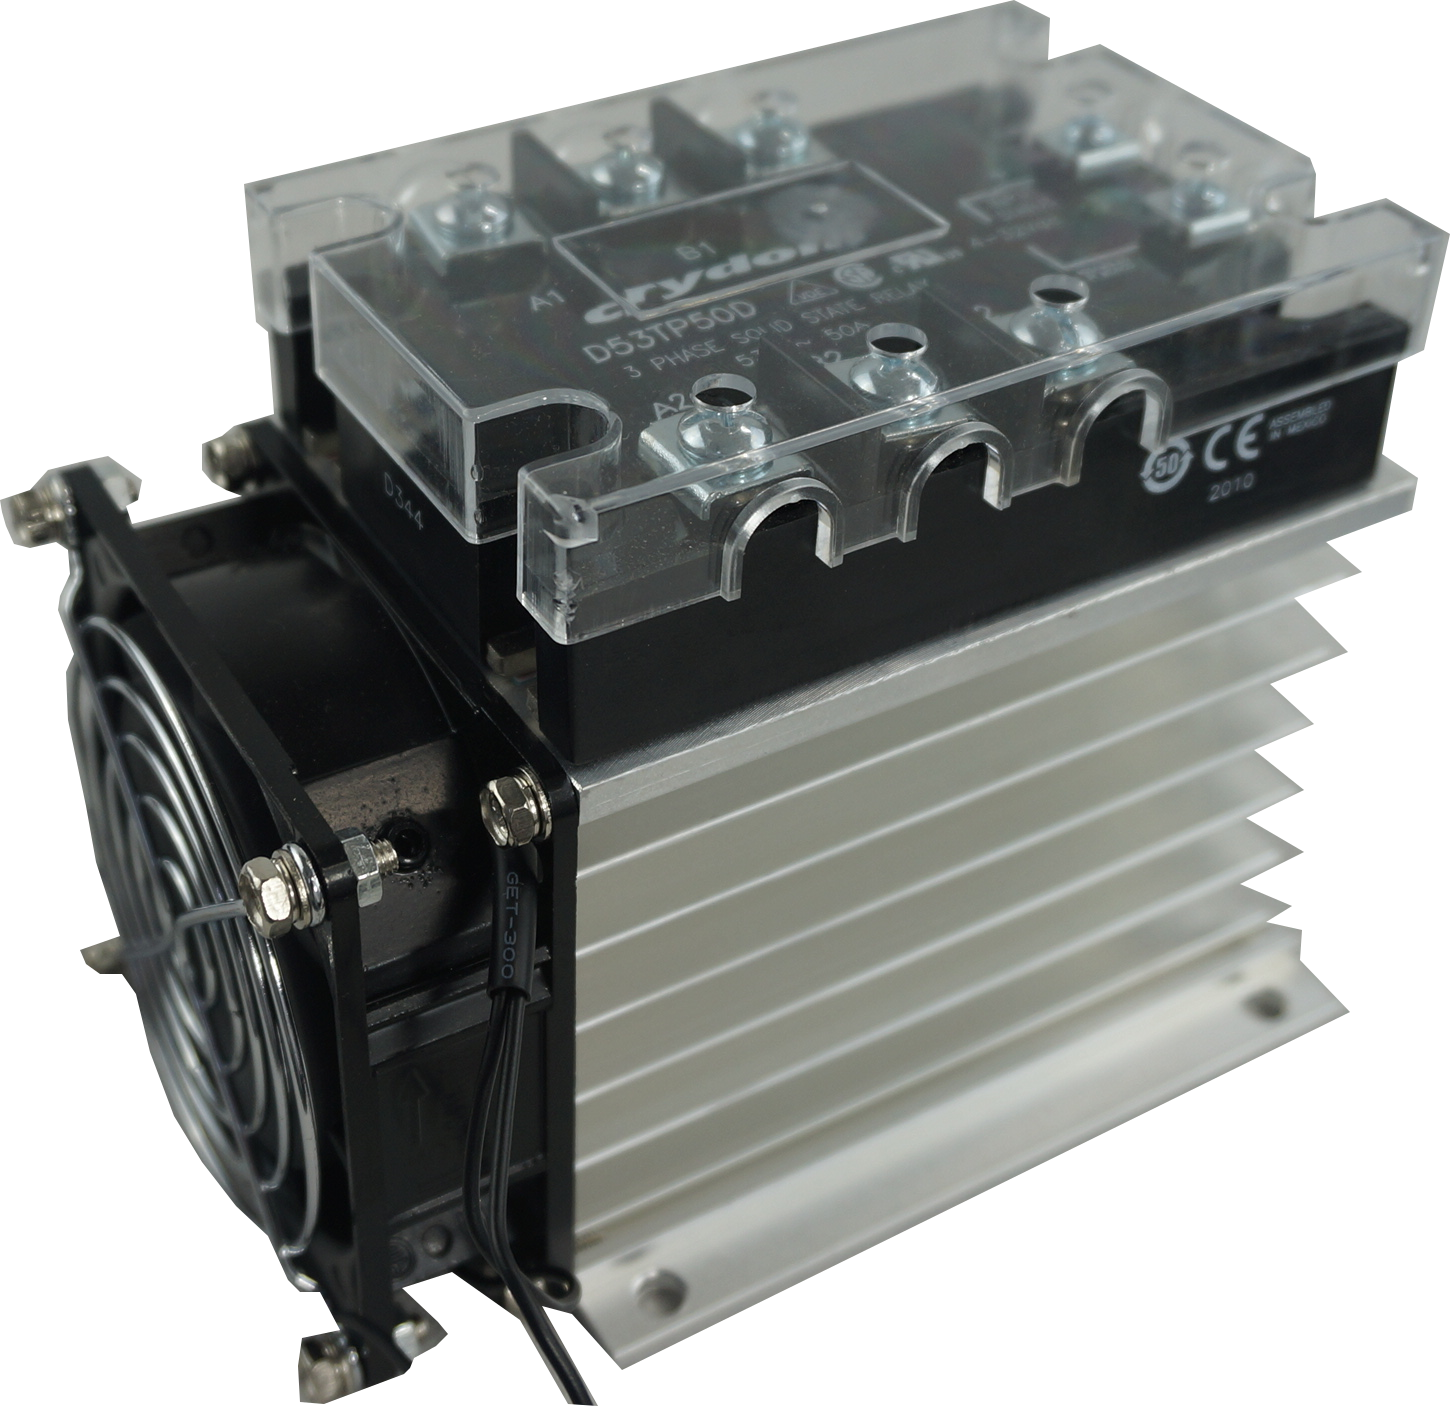 A53TP50D + HS212F, Solid State Relay, and Heatsink Assembly, 3 Phase 90-280VAC Control, 36 Amp per phase @ 40 Deg C, 48-530VAC Load, LED Status Indicator